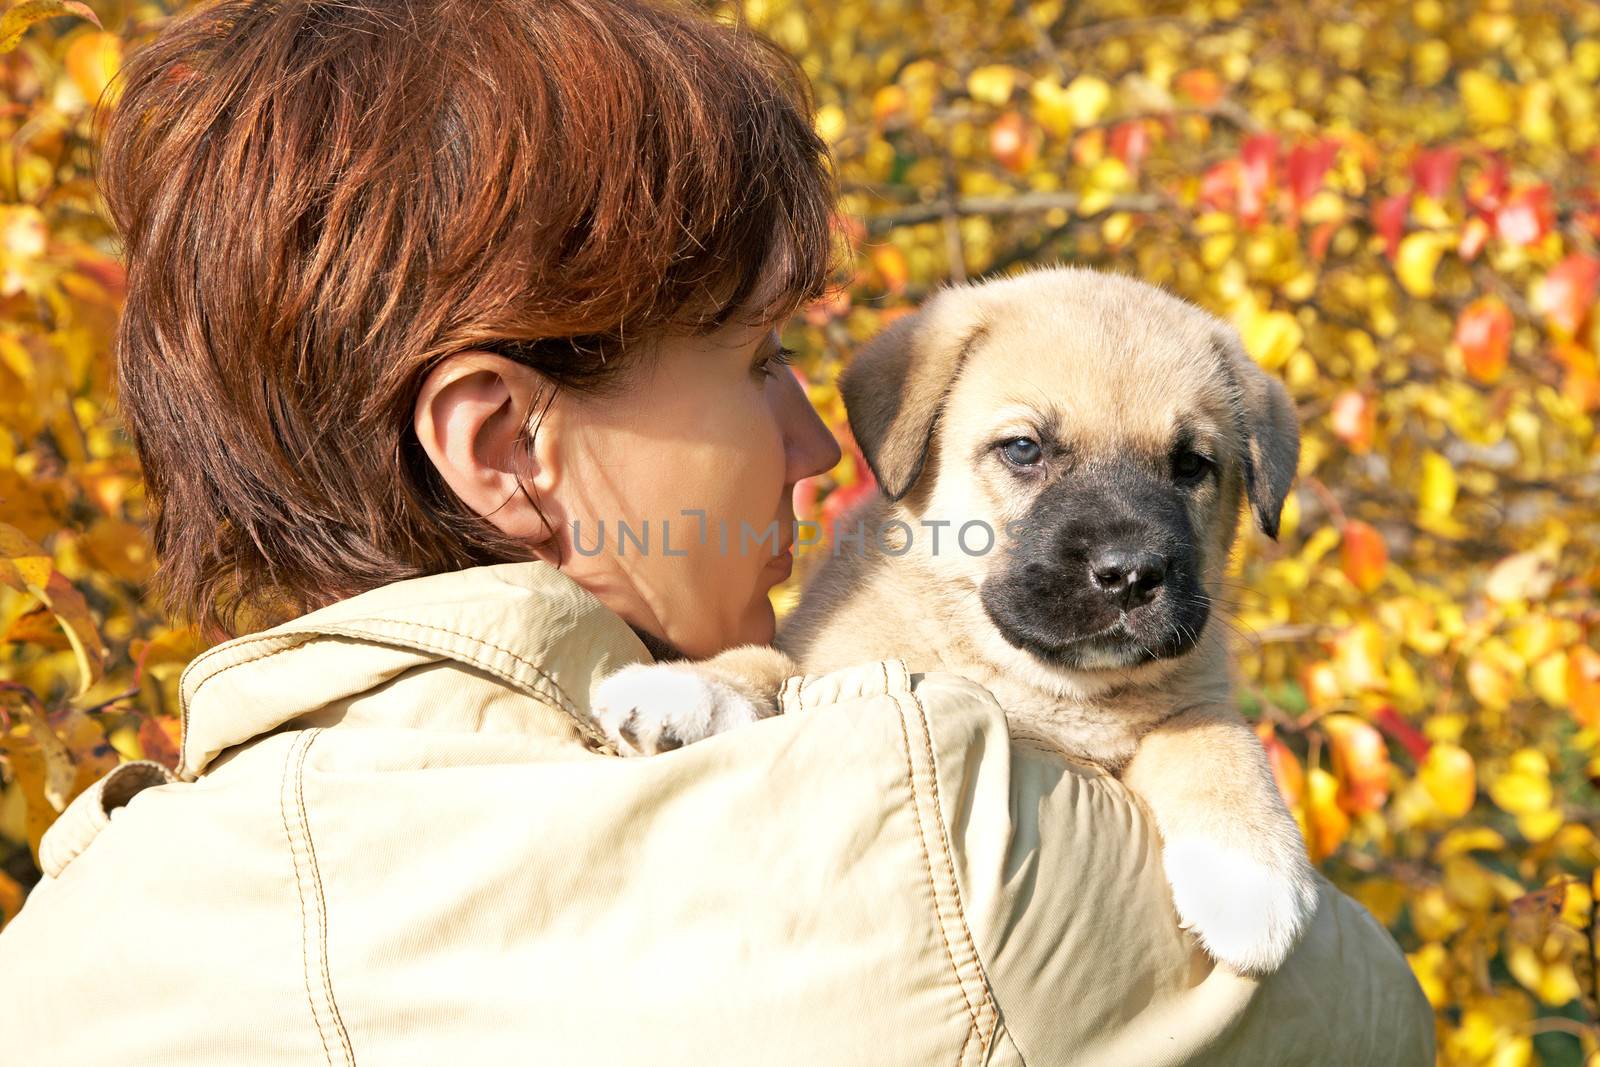 The woman with a puppy in hands against autumn leaves